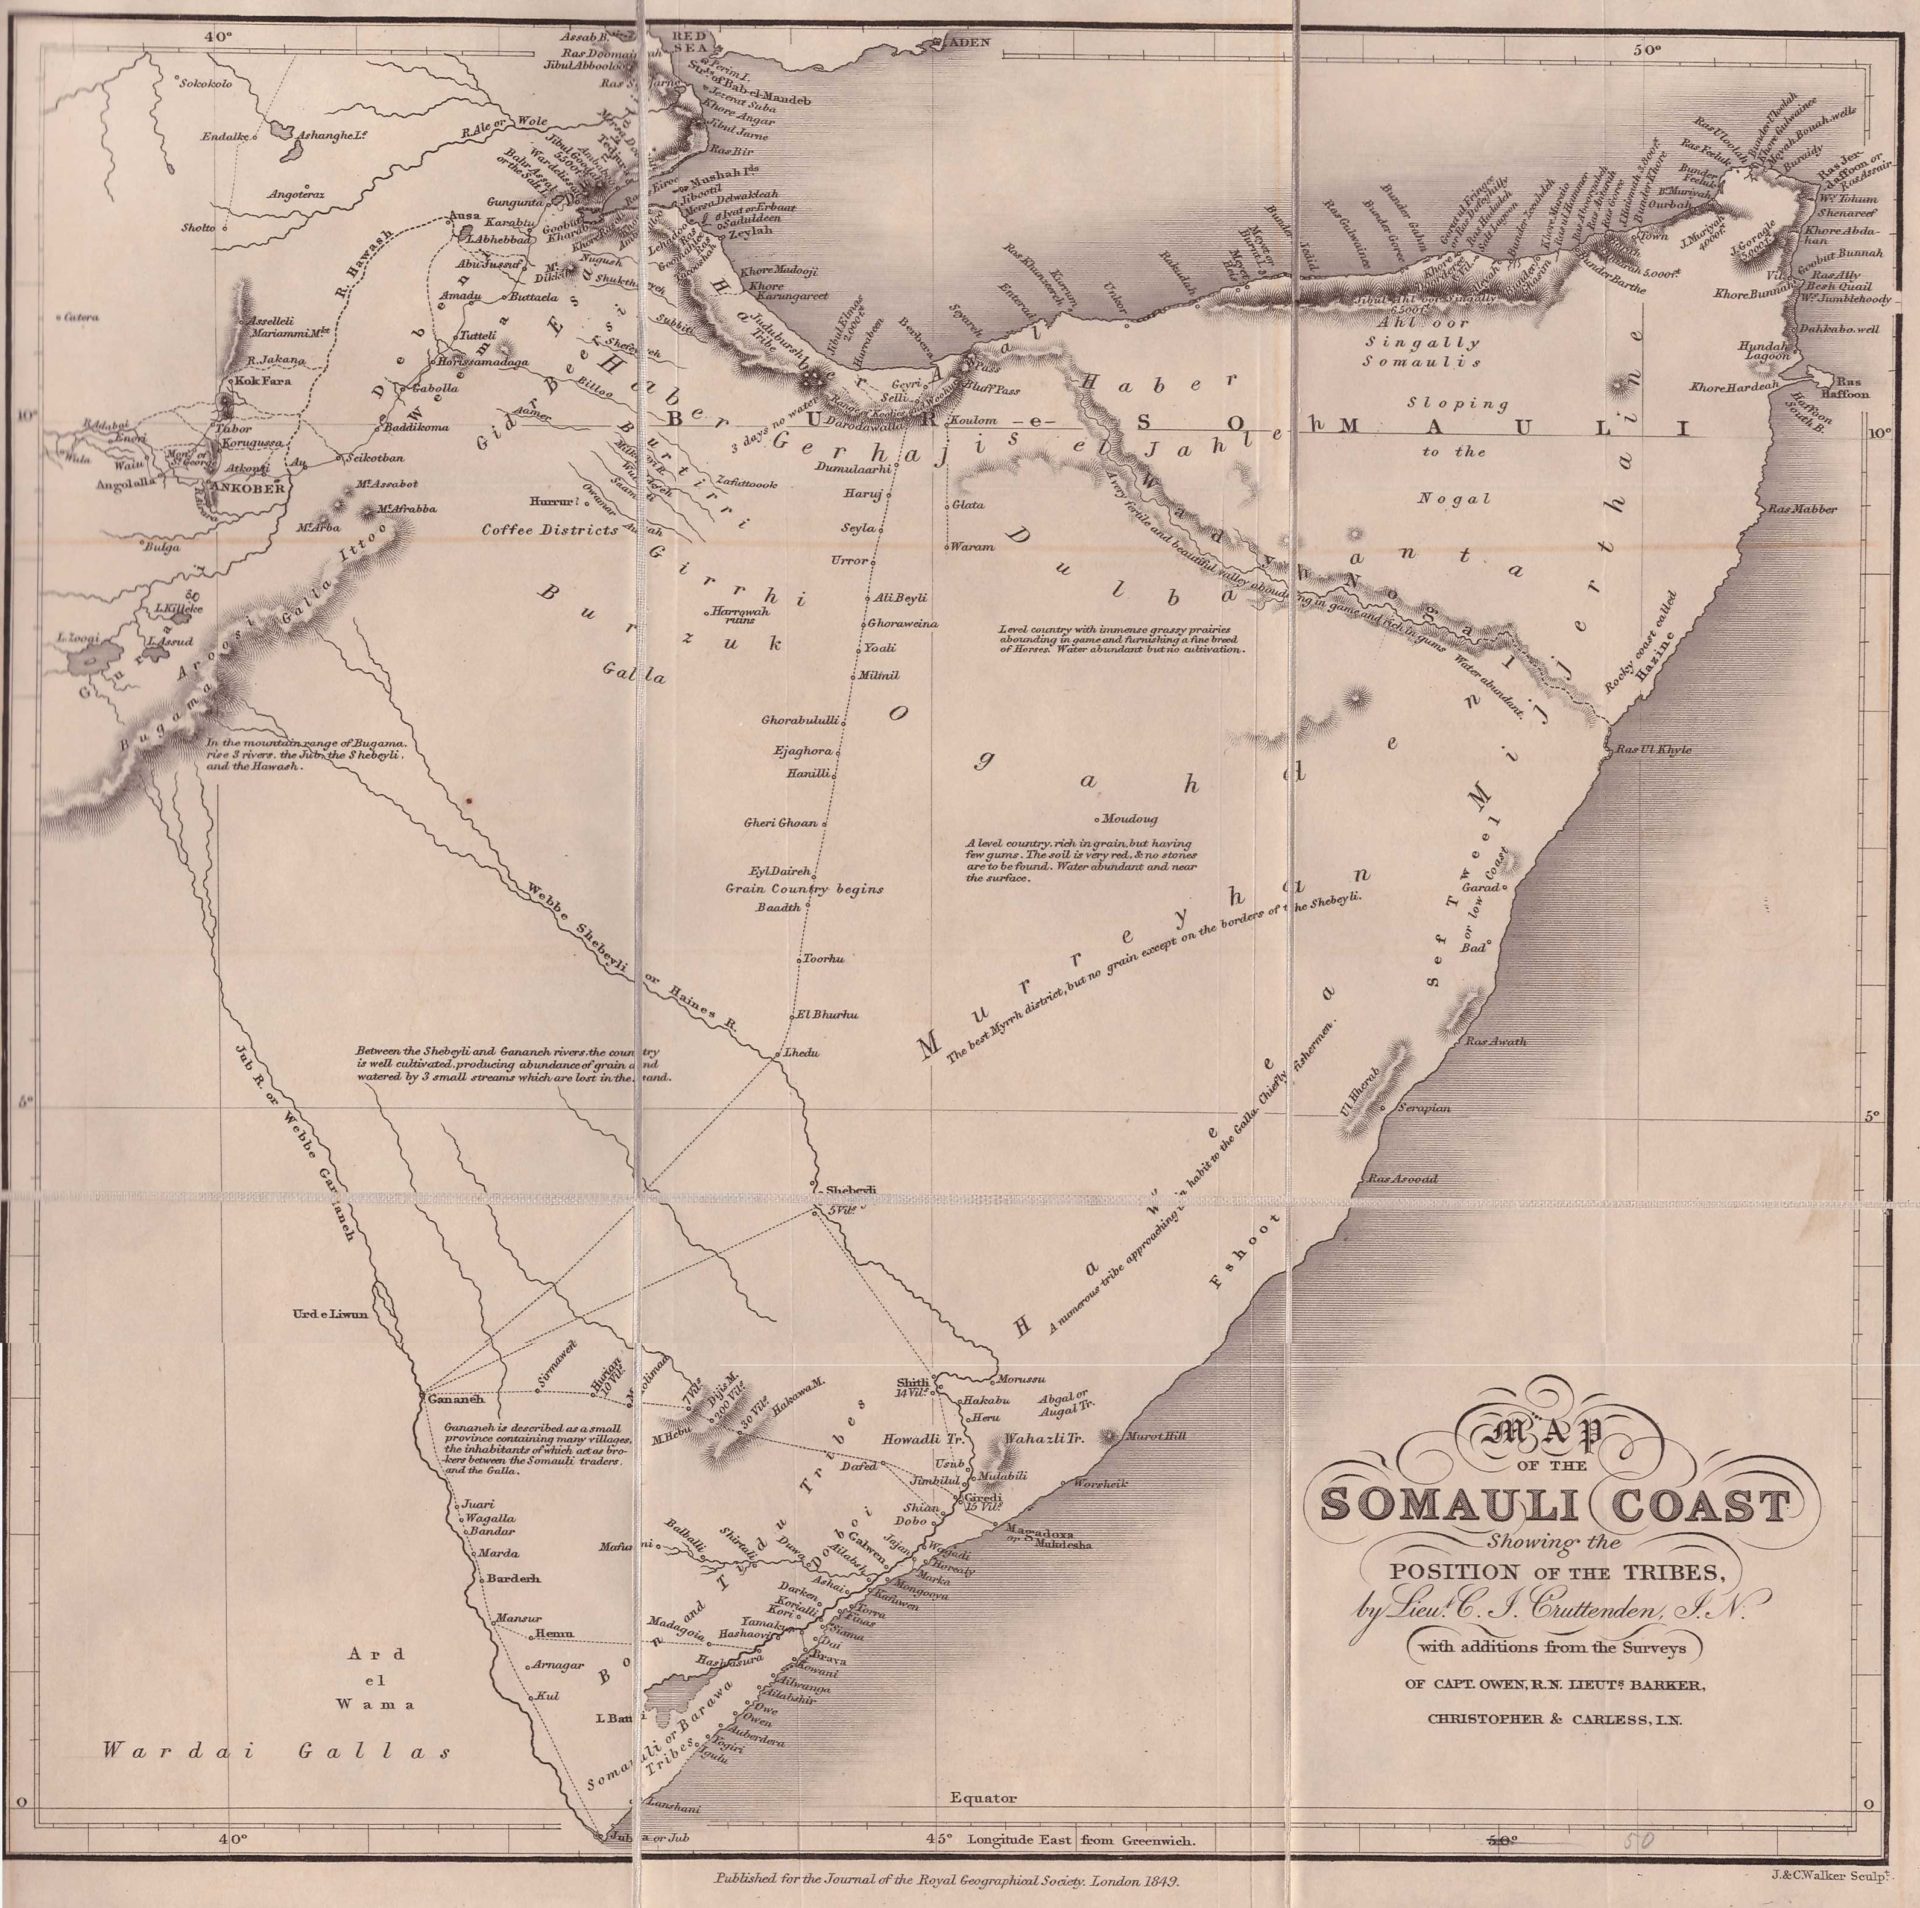 Map of the Somauli Coast Showing the Position of the Tribes